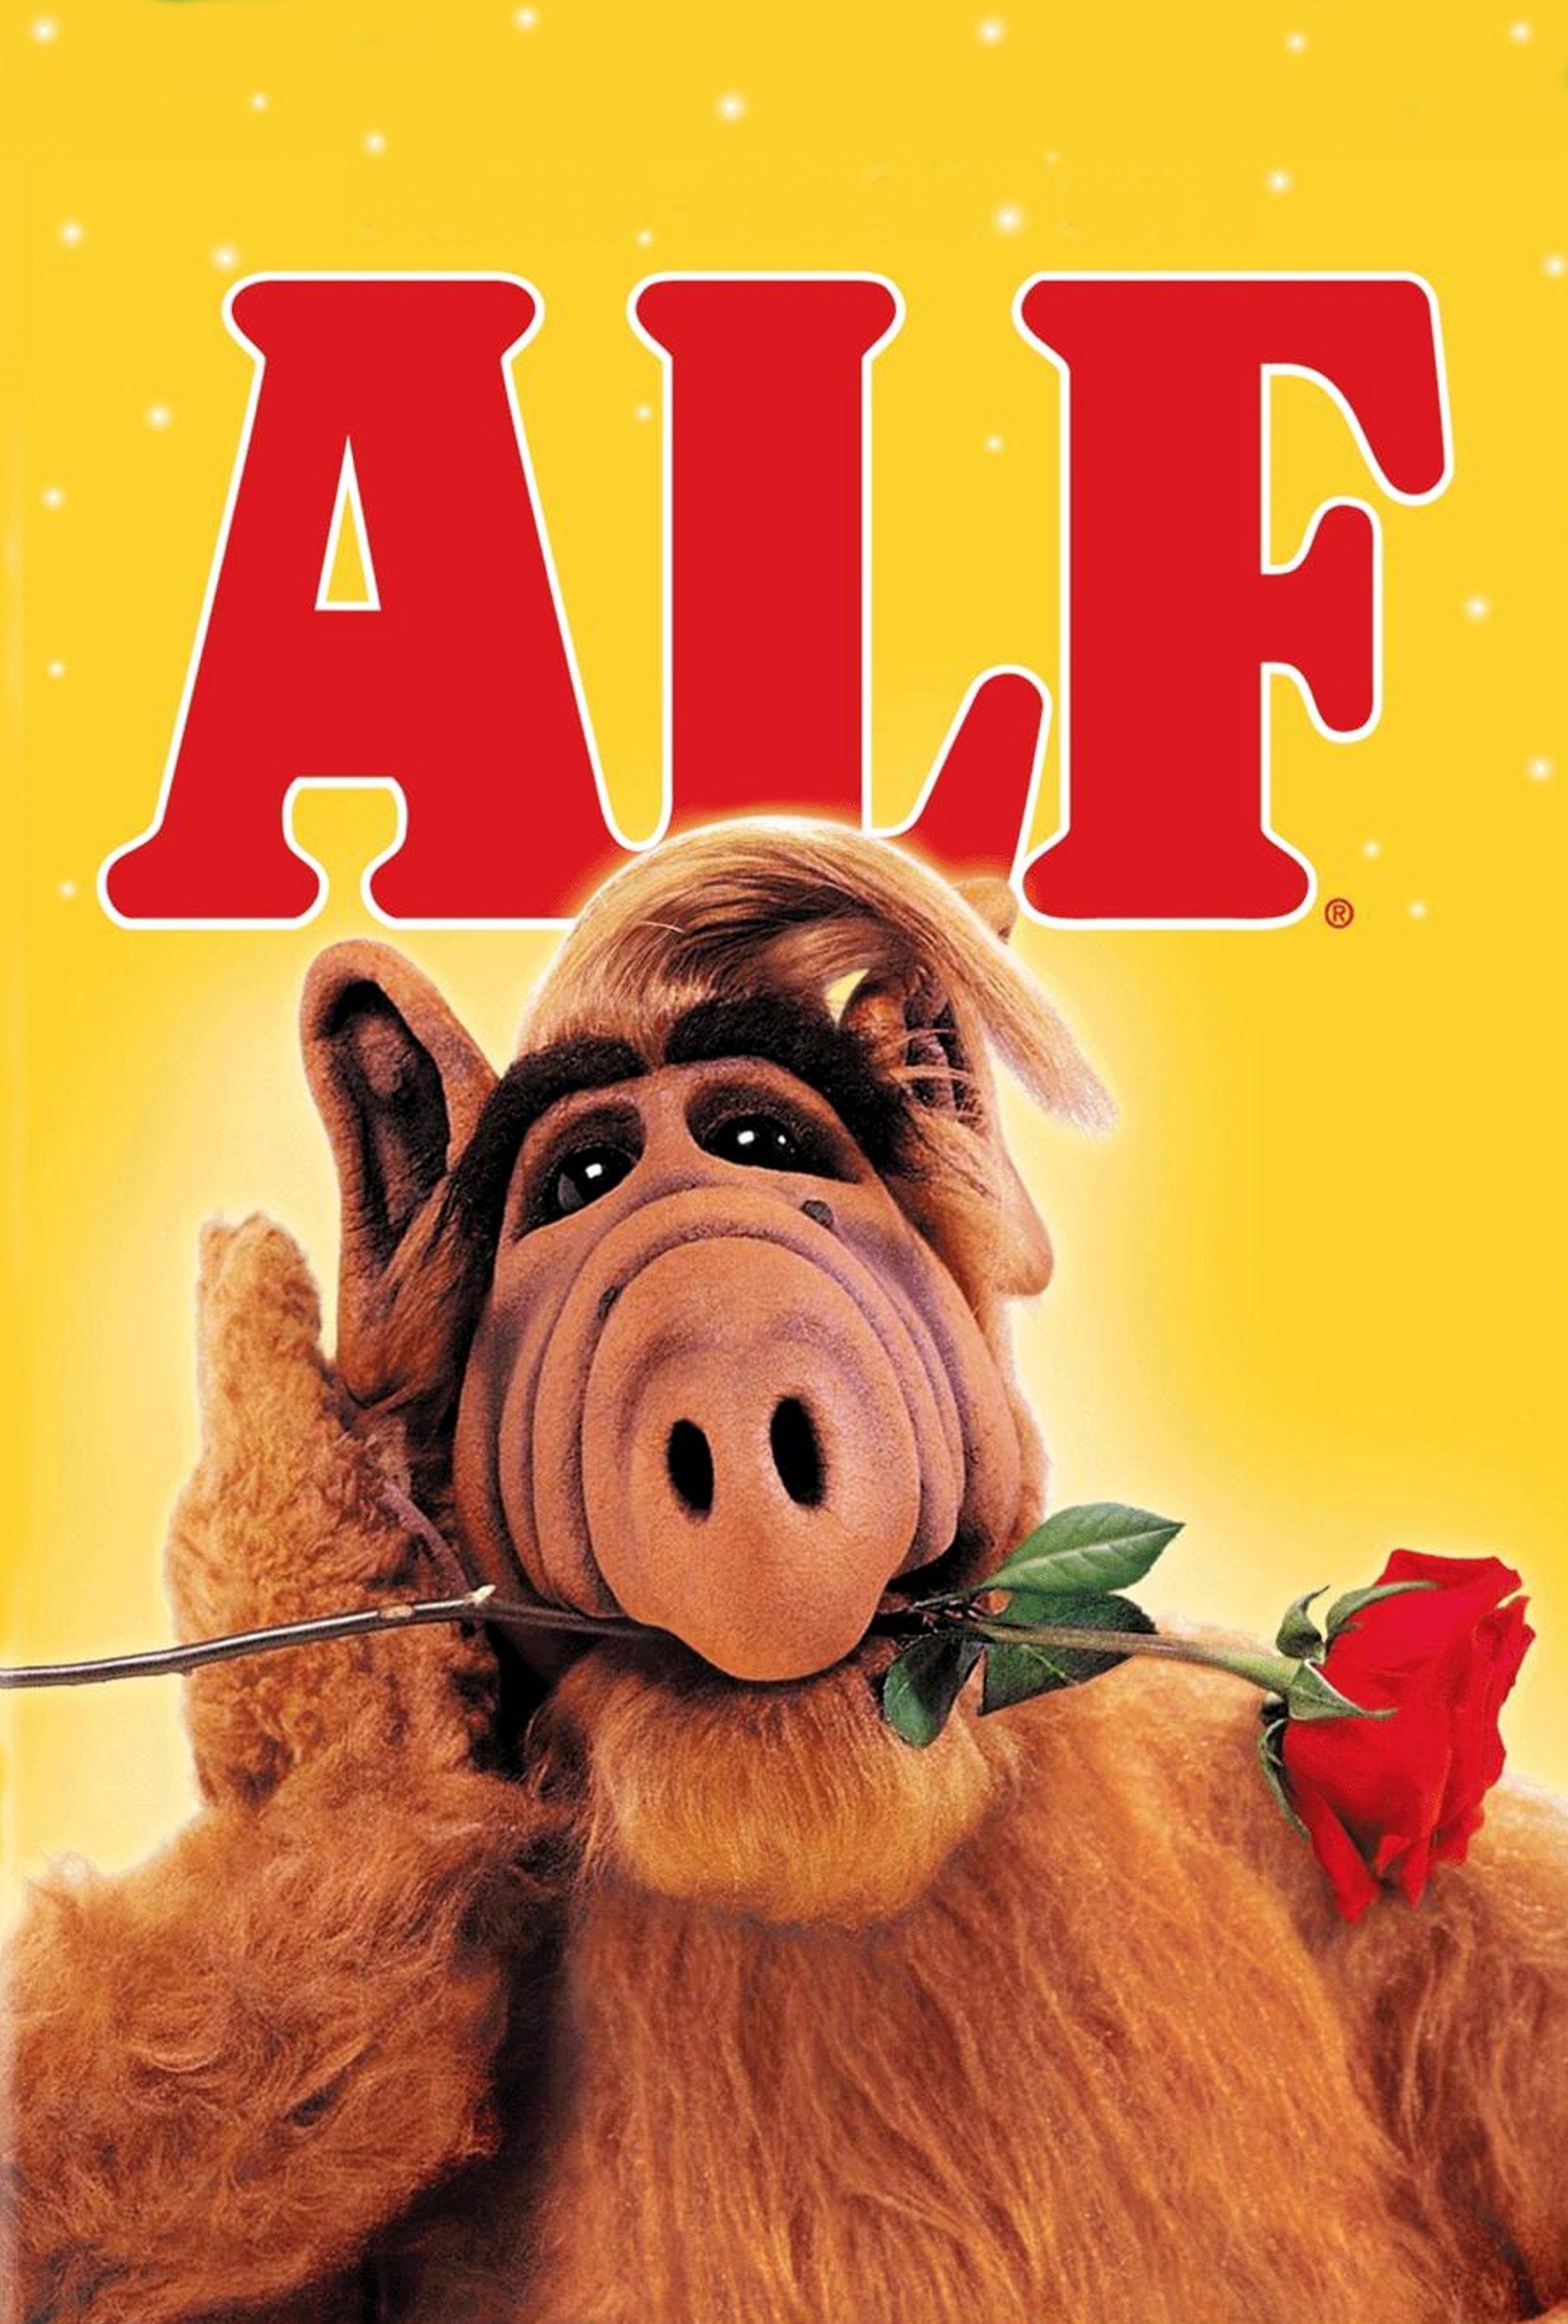 The Alf poster